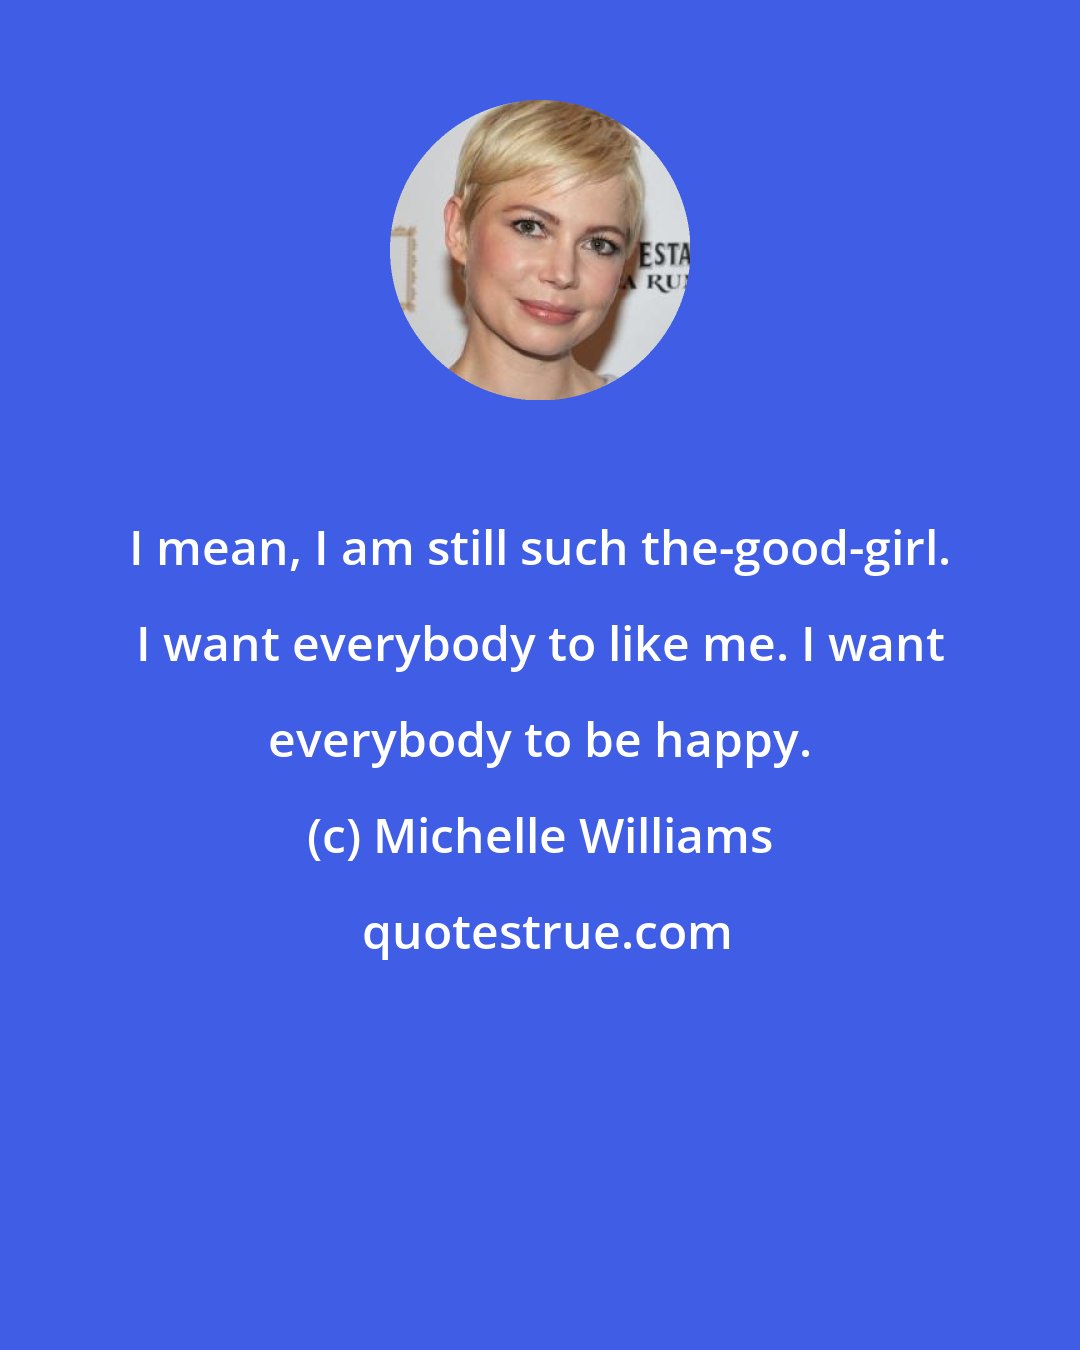 Michelle Williams: I mean, I am still such the-good-girl. I want everybody to like me. I want everybody to be happy.